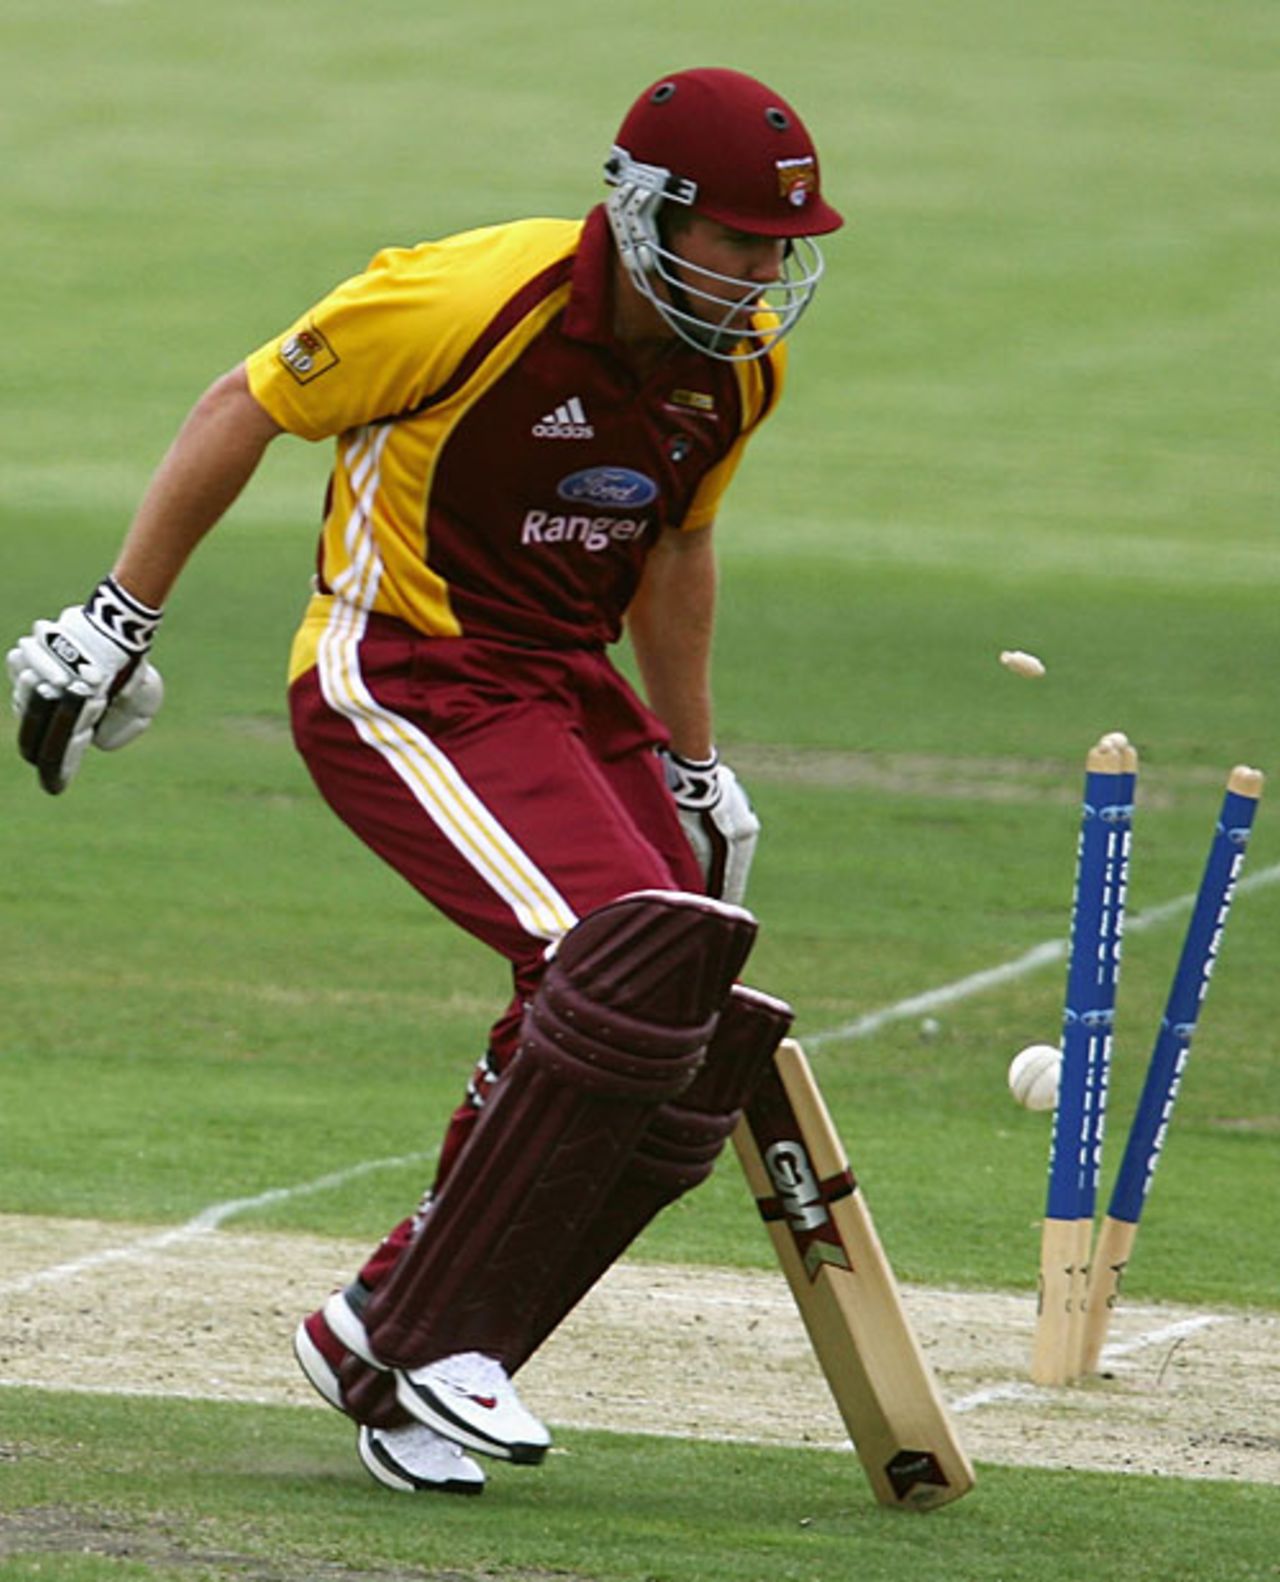 James Hopes was run out for 39, South Australia v Queensland, FR Cup, Adelaide, December 23, 2007